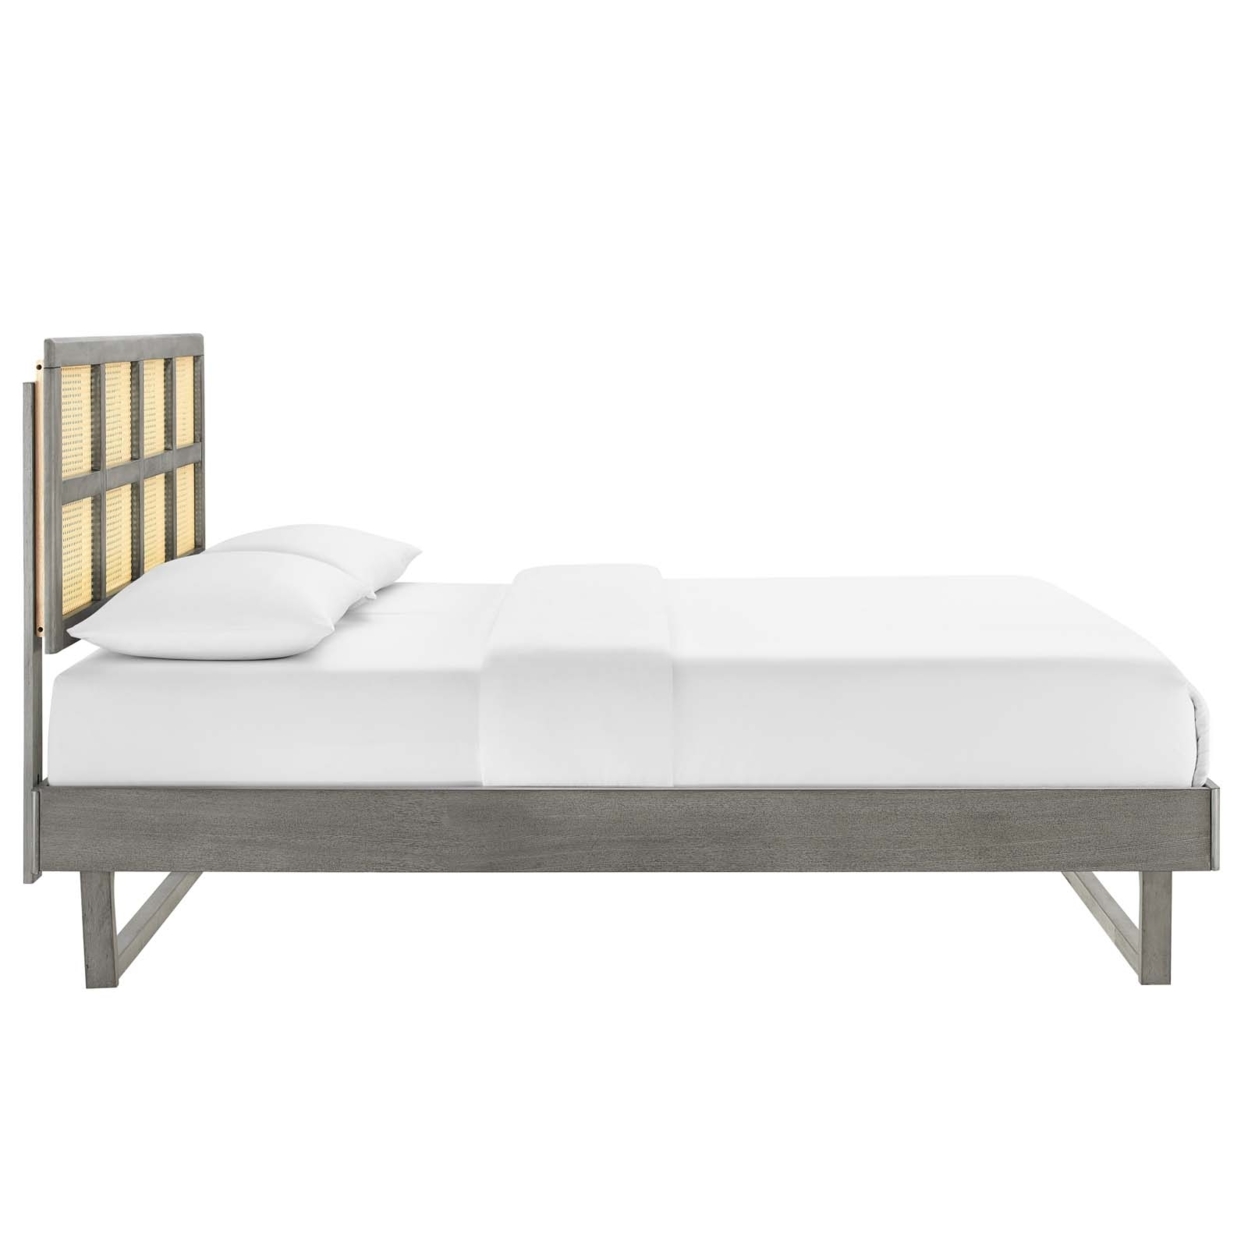 Sidney Cane And Wood Queen Platform Bed With Angular Legs, Gray